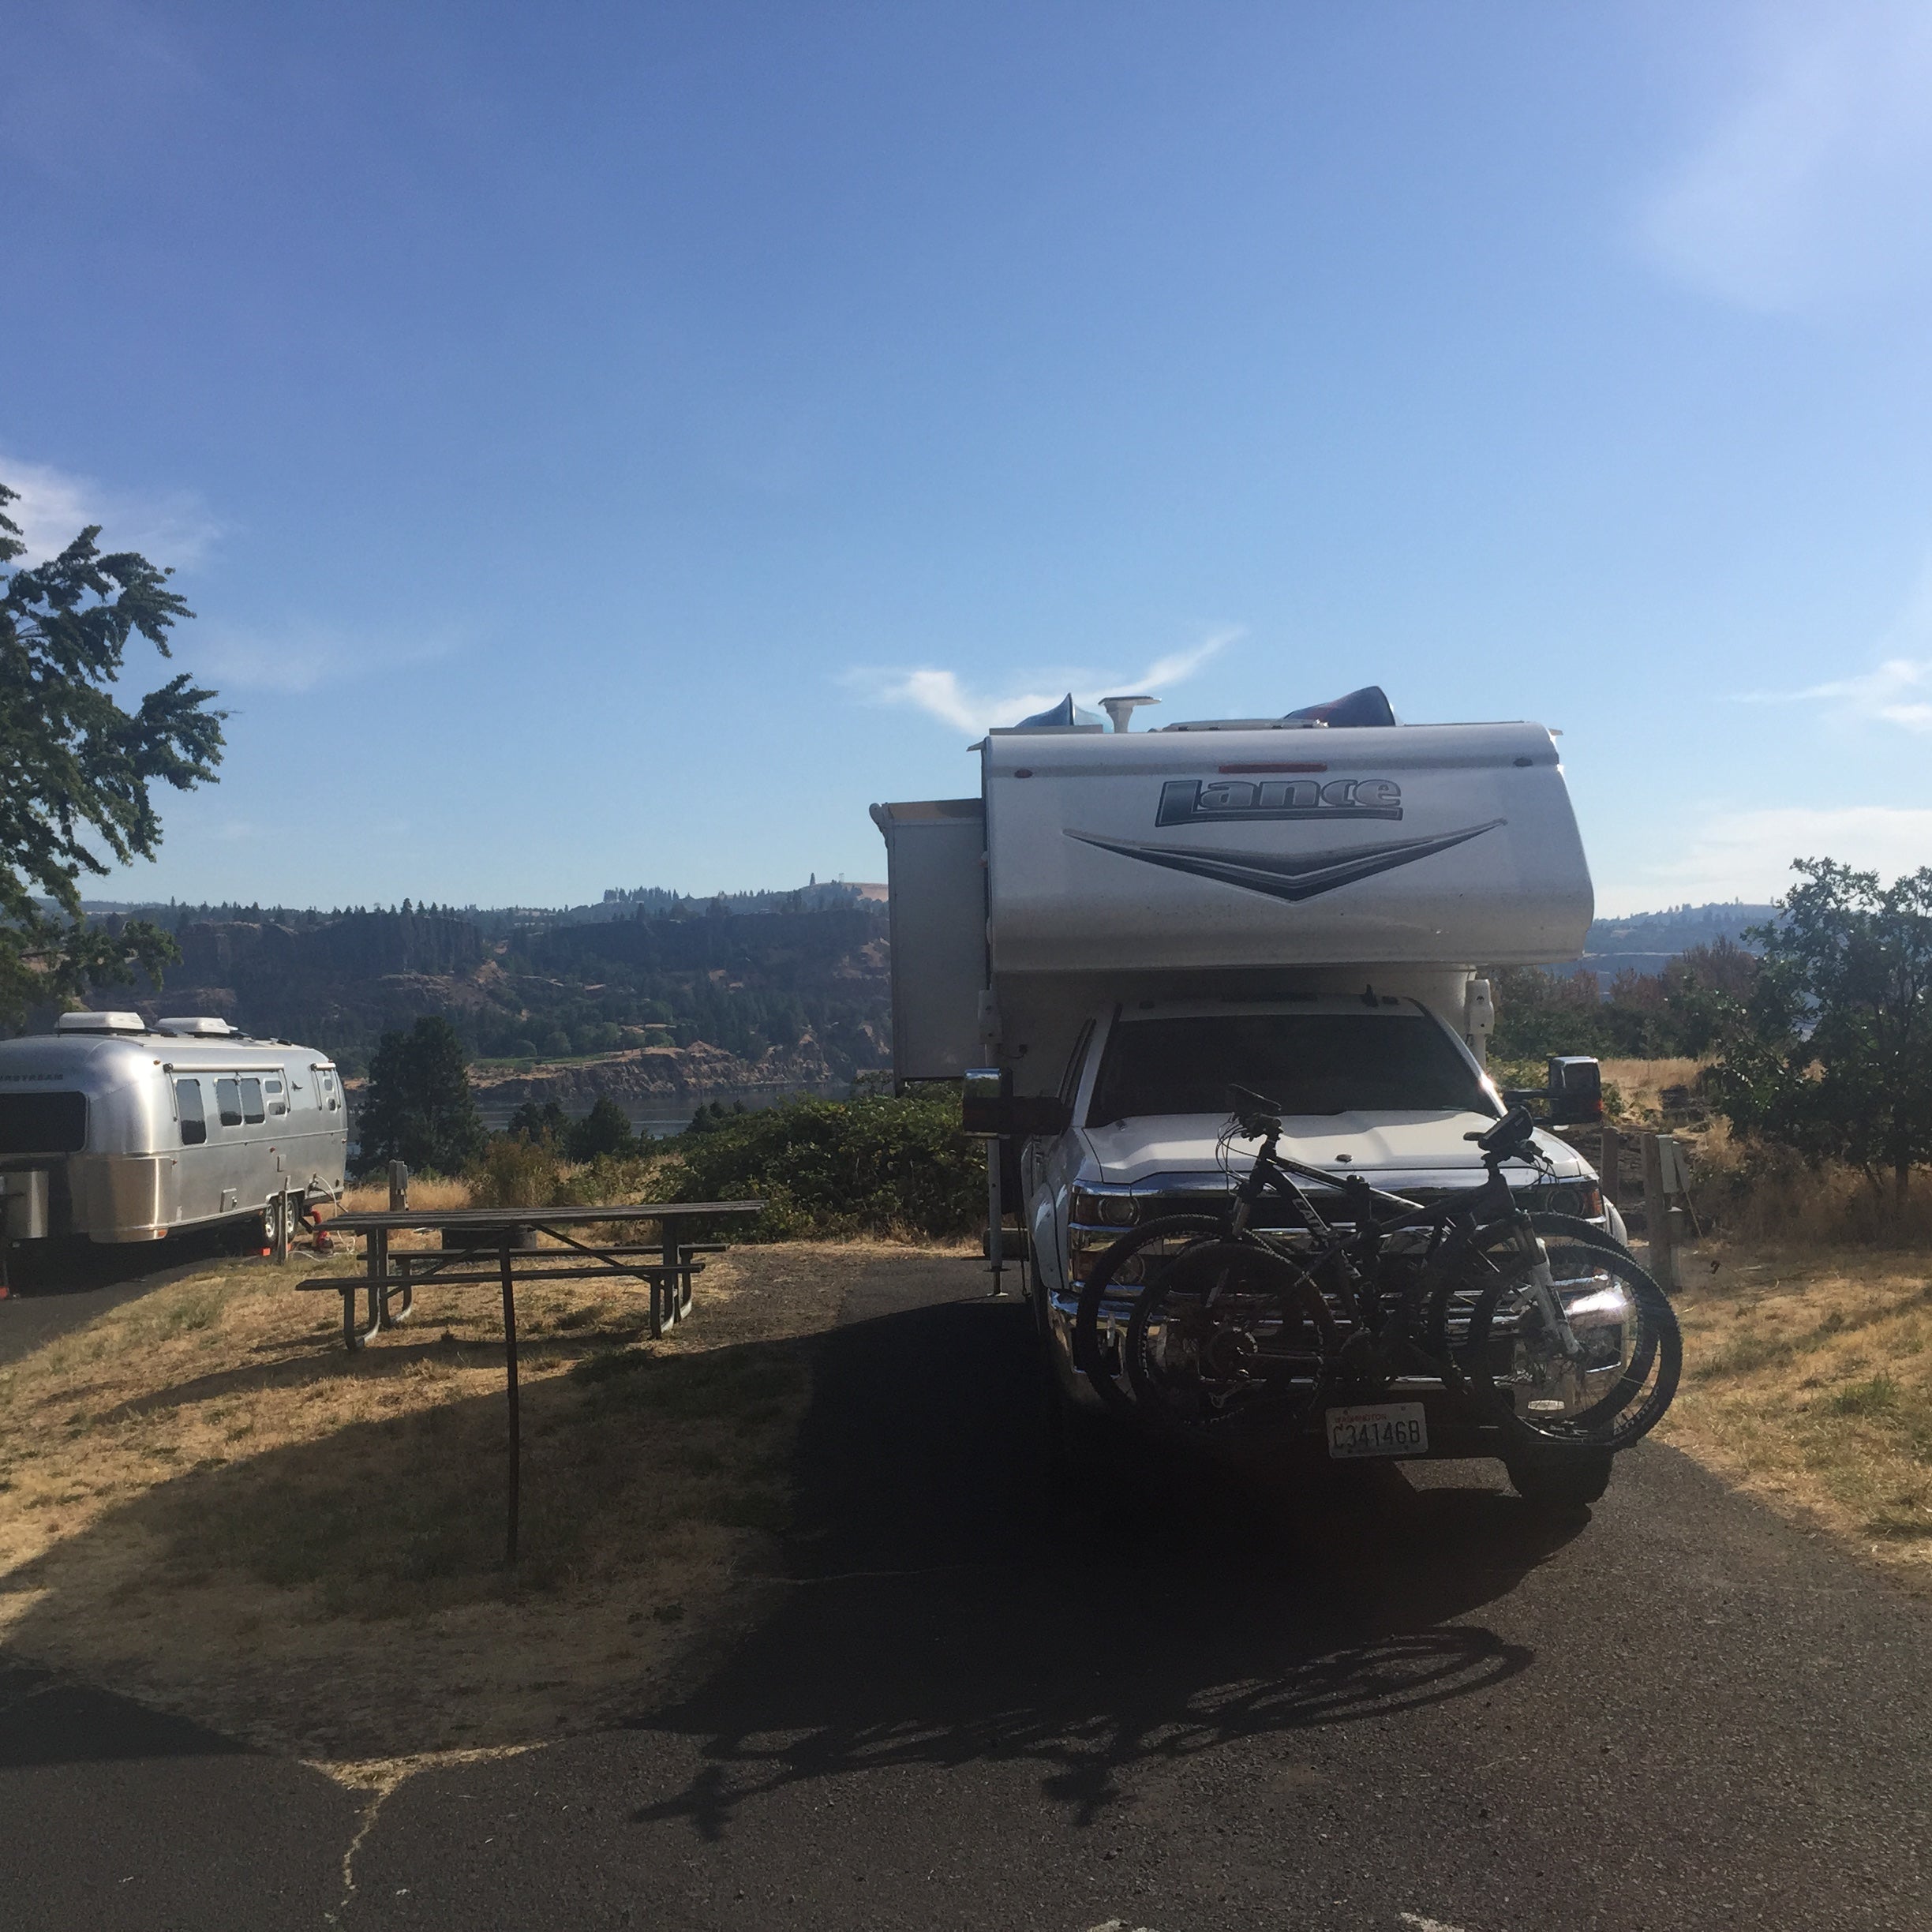 Camper submitted image from Memaloose State Park - 3